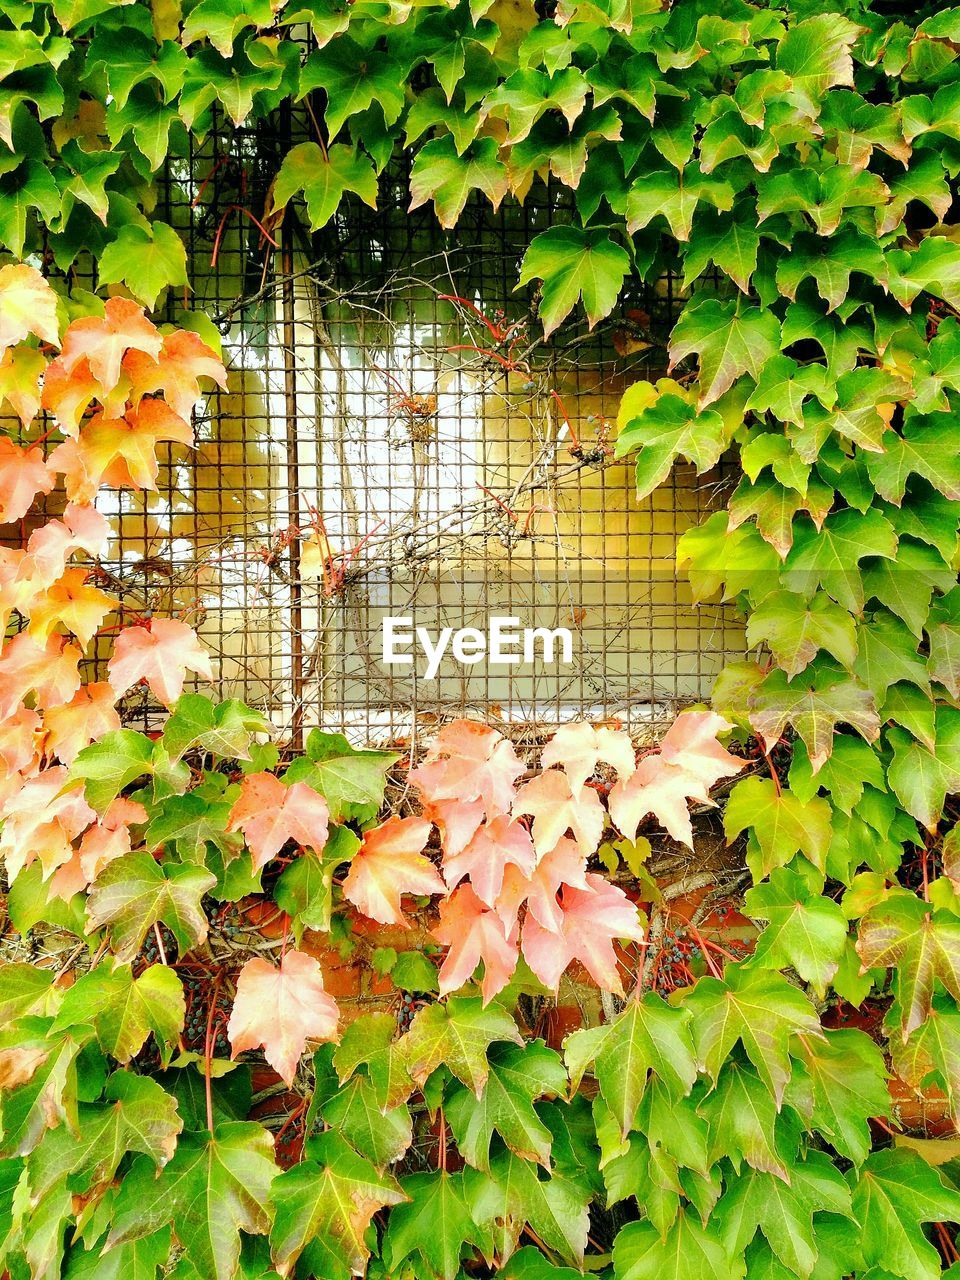 CLOSE-UP OF IVY IN AUTUMN